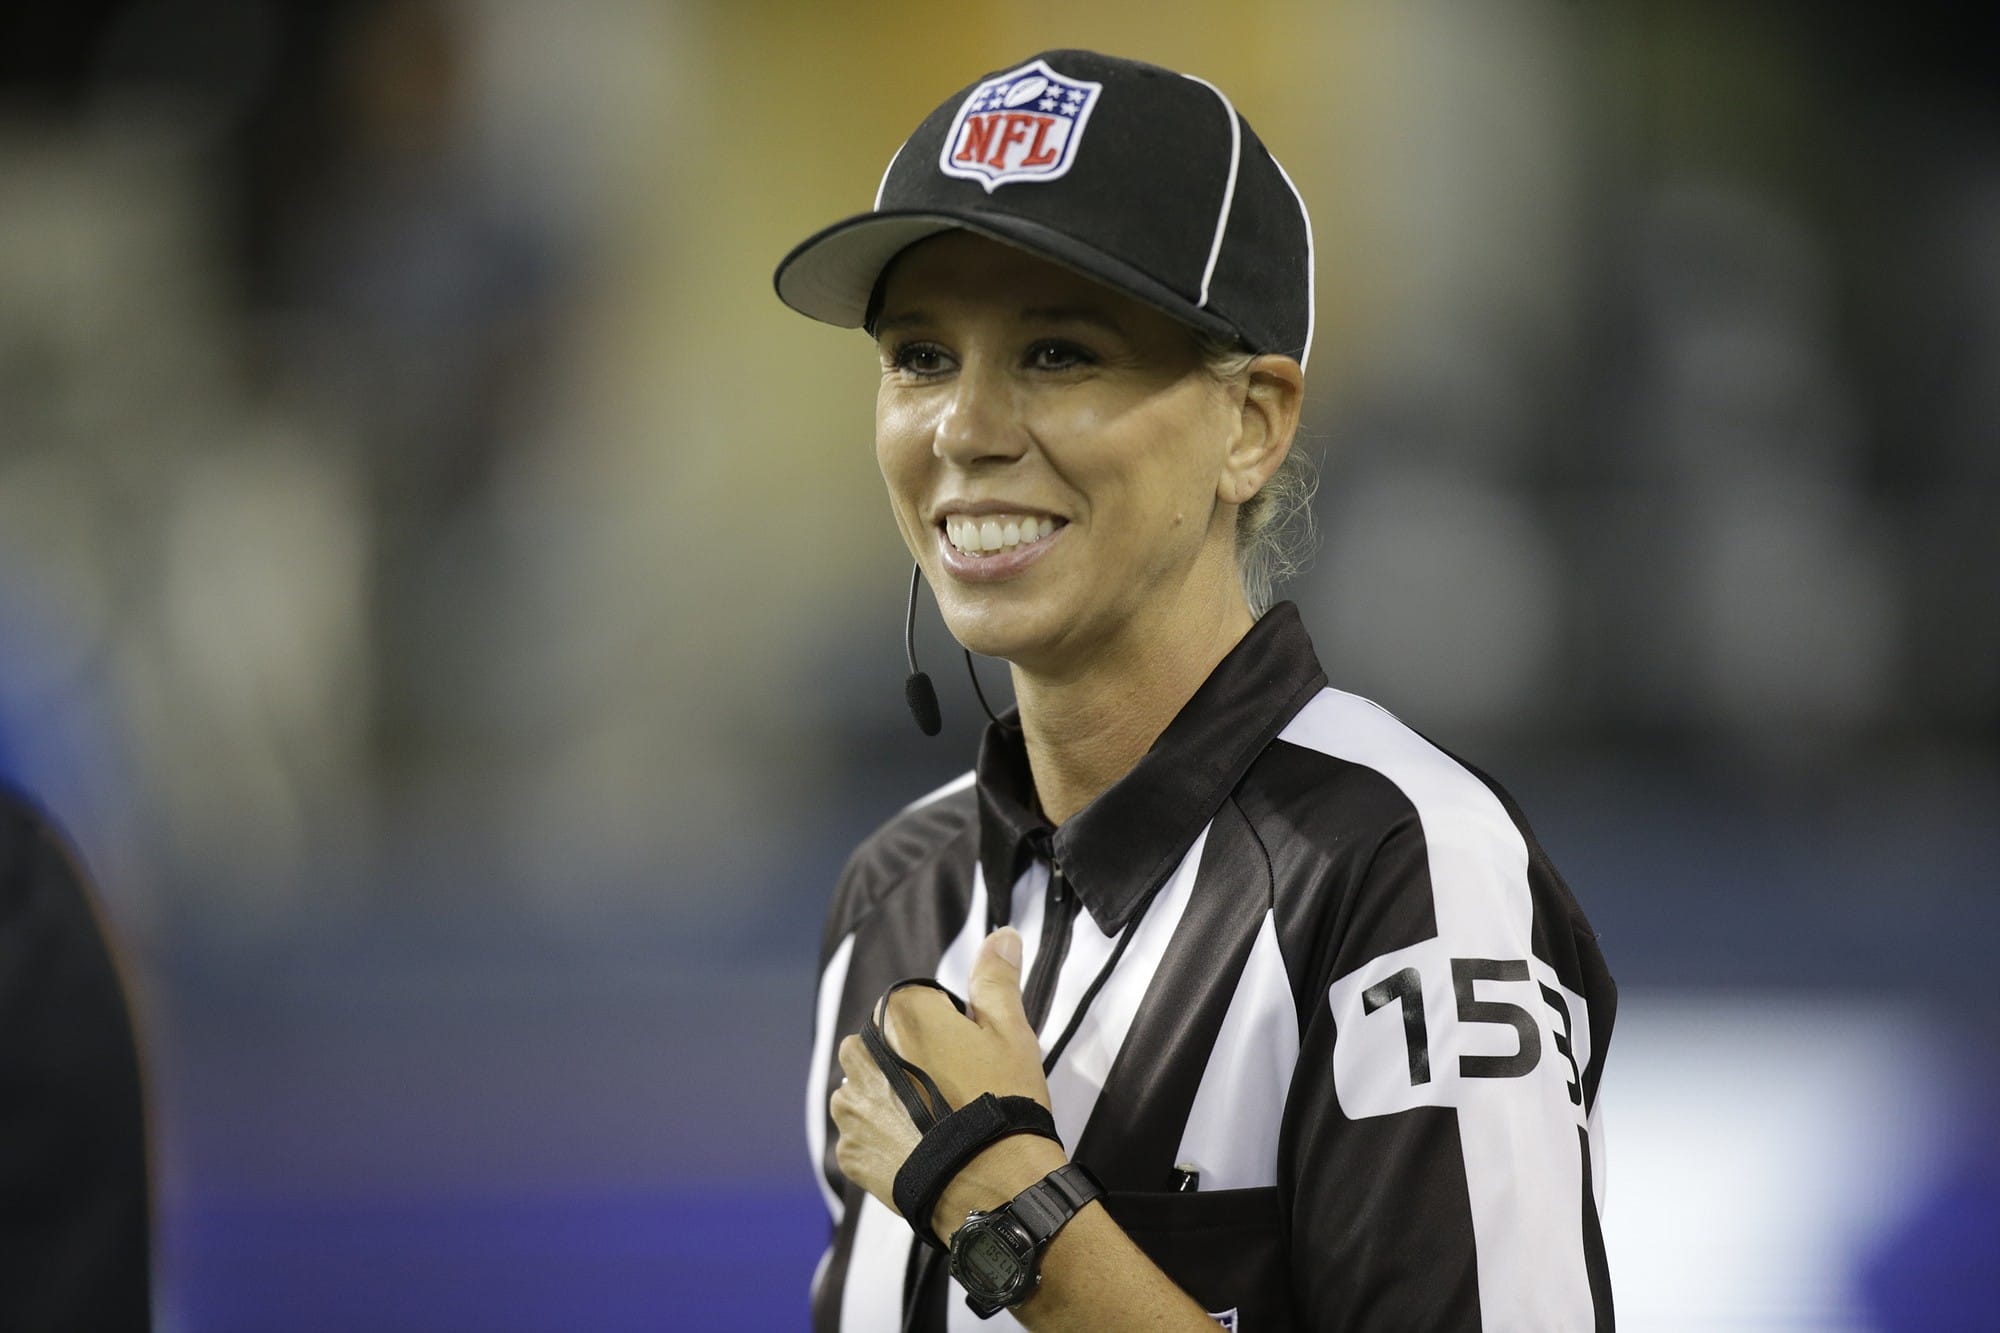 Sarah Thomas, who has worked NFL exhibition games, will be a line judge for the 2015 season, the league announced Wednesday, April 8, 2015.